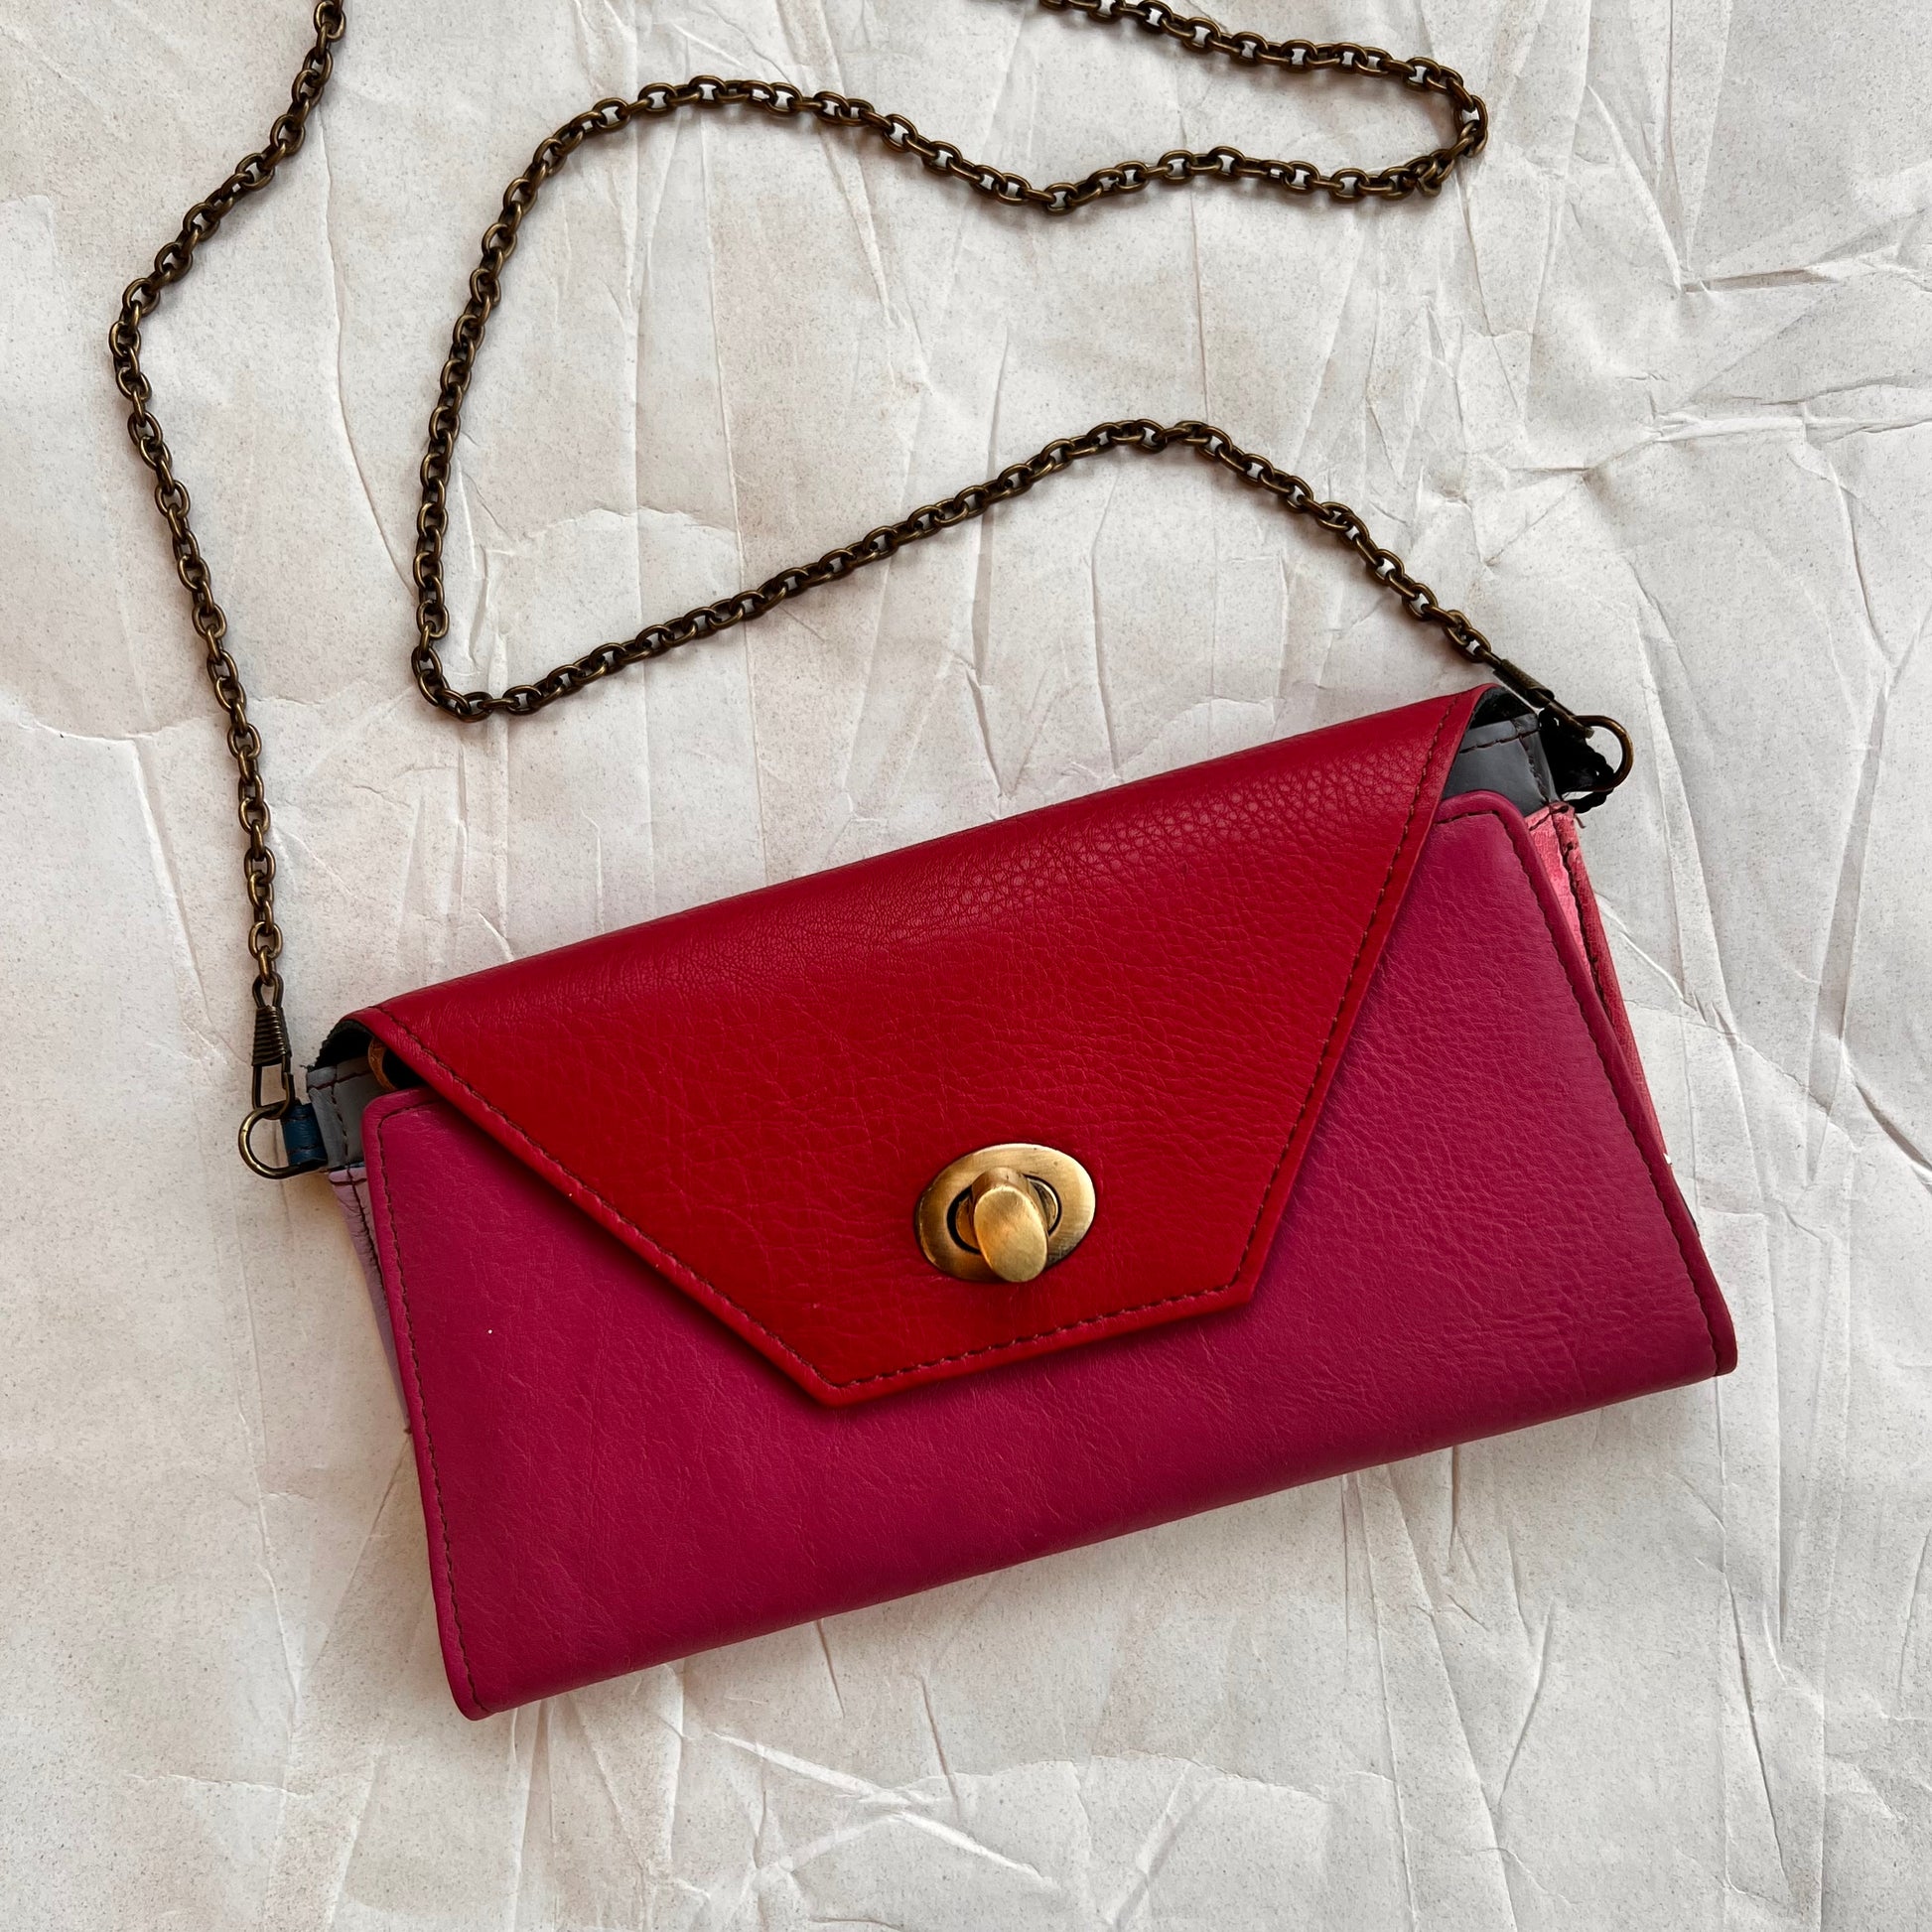 berry secret clutch wallet with chain attached.